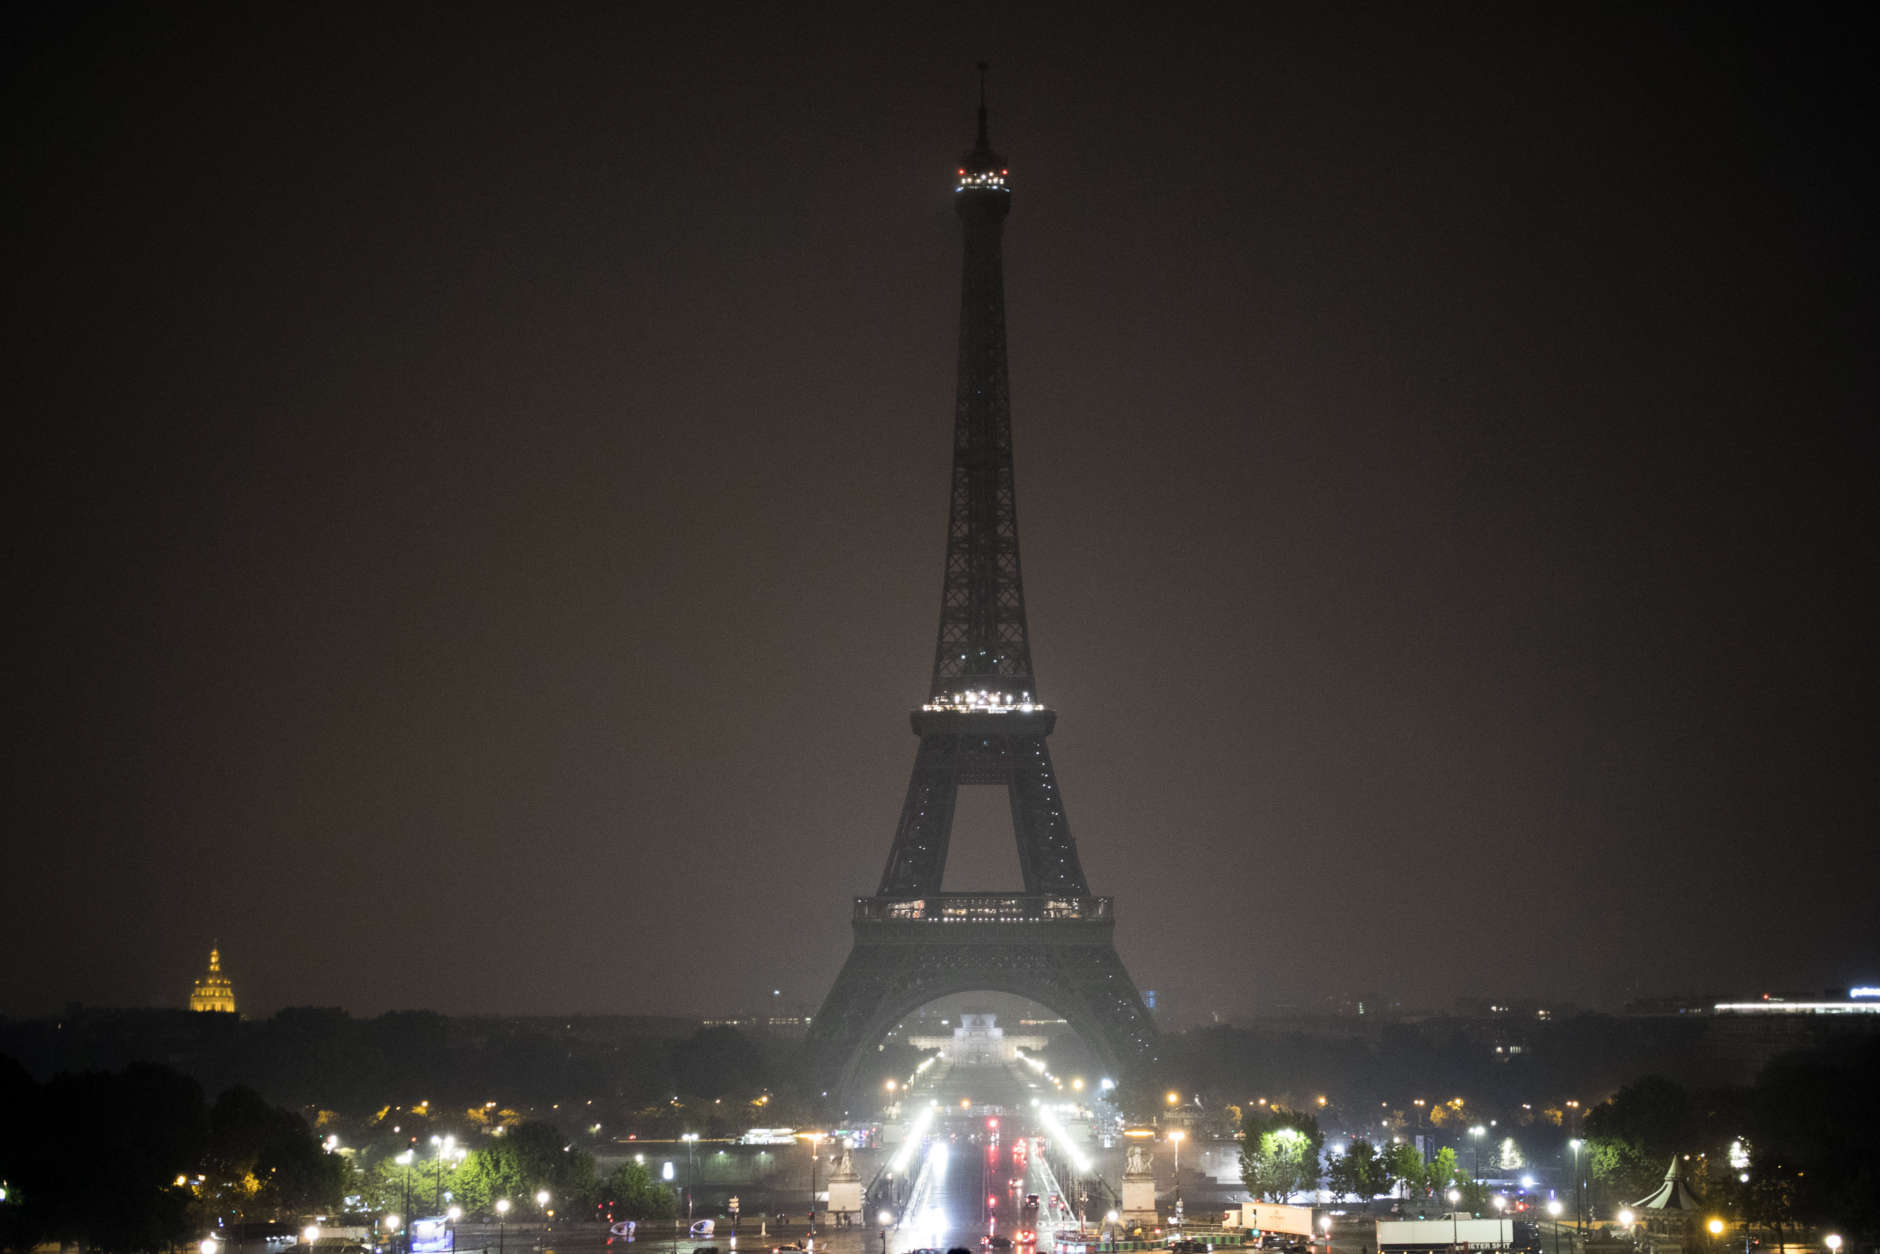 The Eiffel tower is seen with its lights turned off in Paris, France, Monday, Oct. 2, 2017. Paris mayor Anne Hidalgo said the Eiffel tower will turn off its lights Monday at midnight Paris hour to pay tribute to Las Vegas and Marseille victims. (AP Photo/Kamil Zihnioglu)